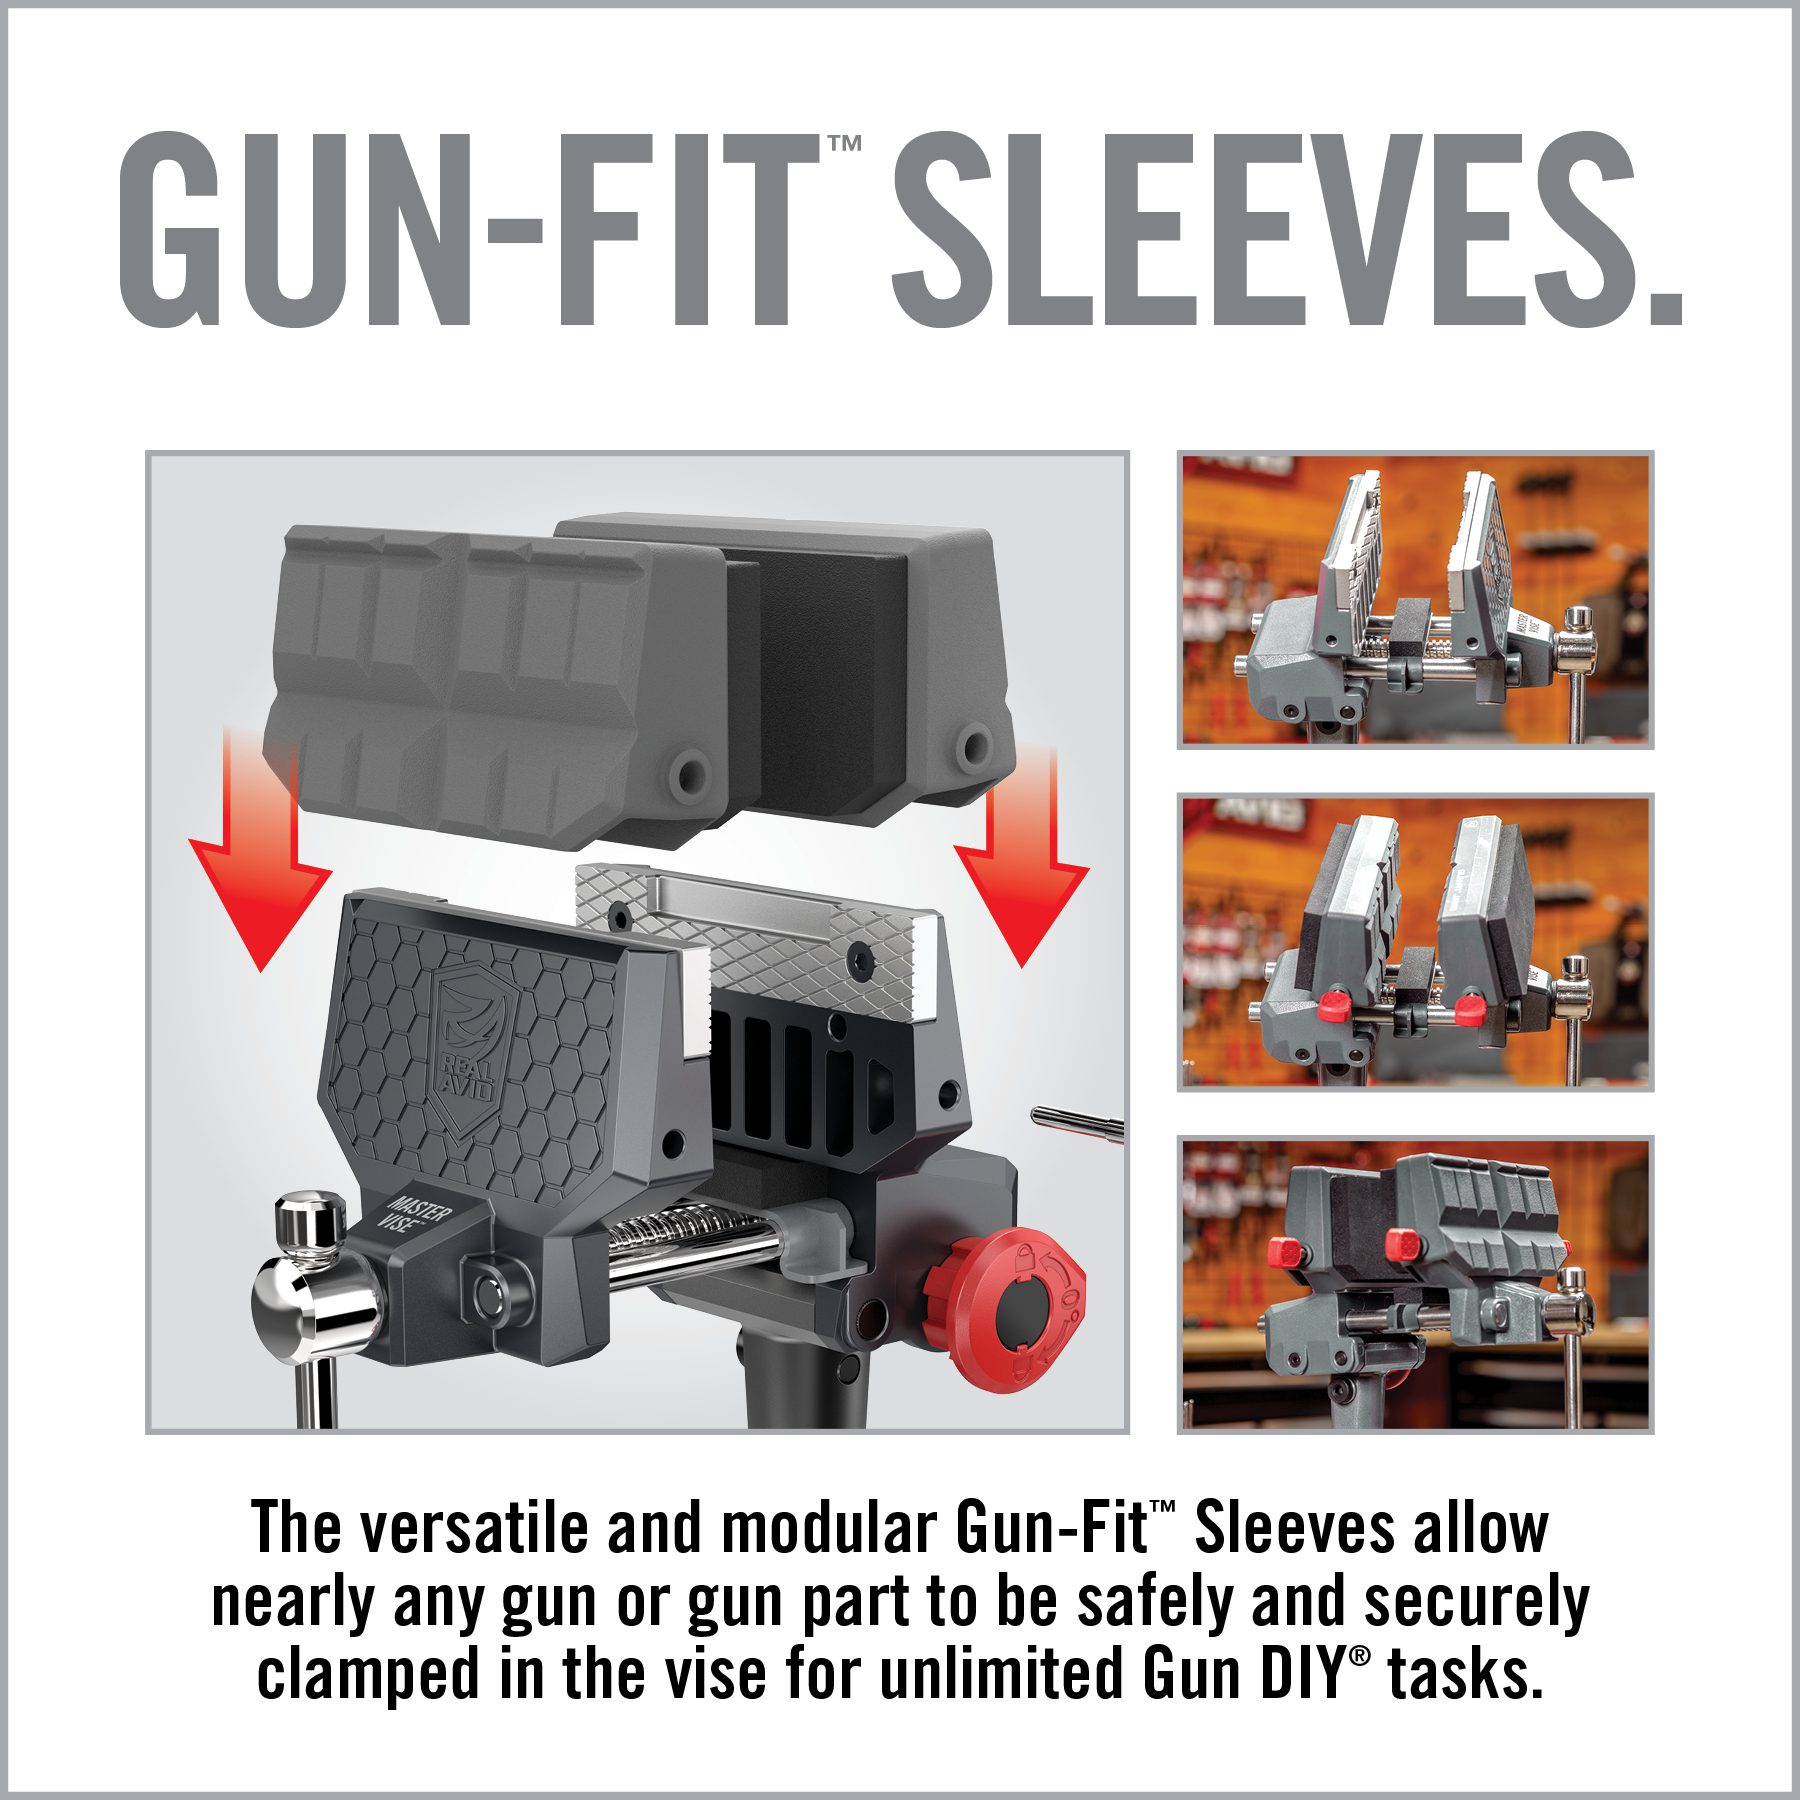 the gun - fit sleeves are designed to protect your gun from falling